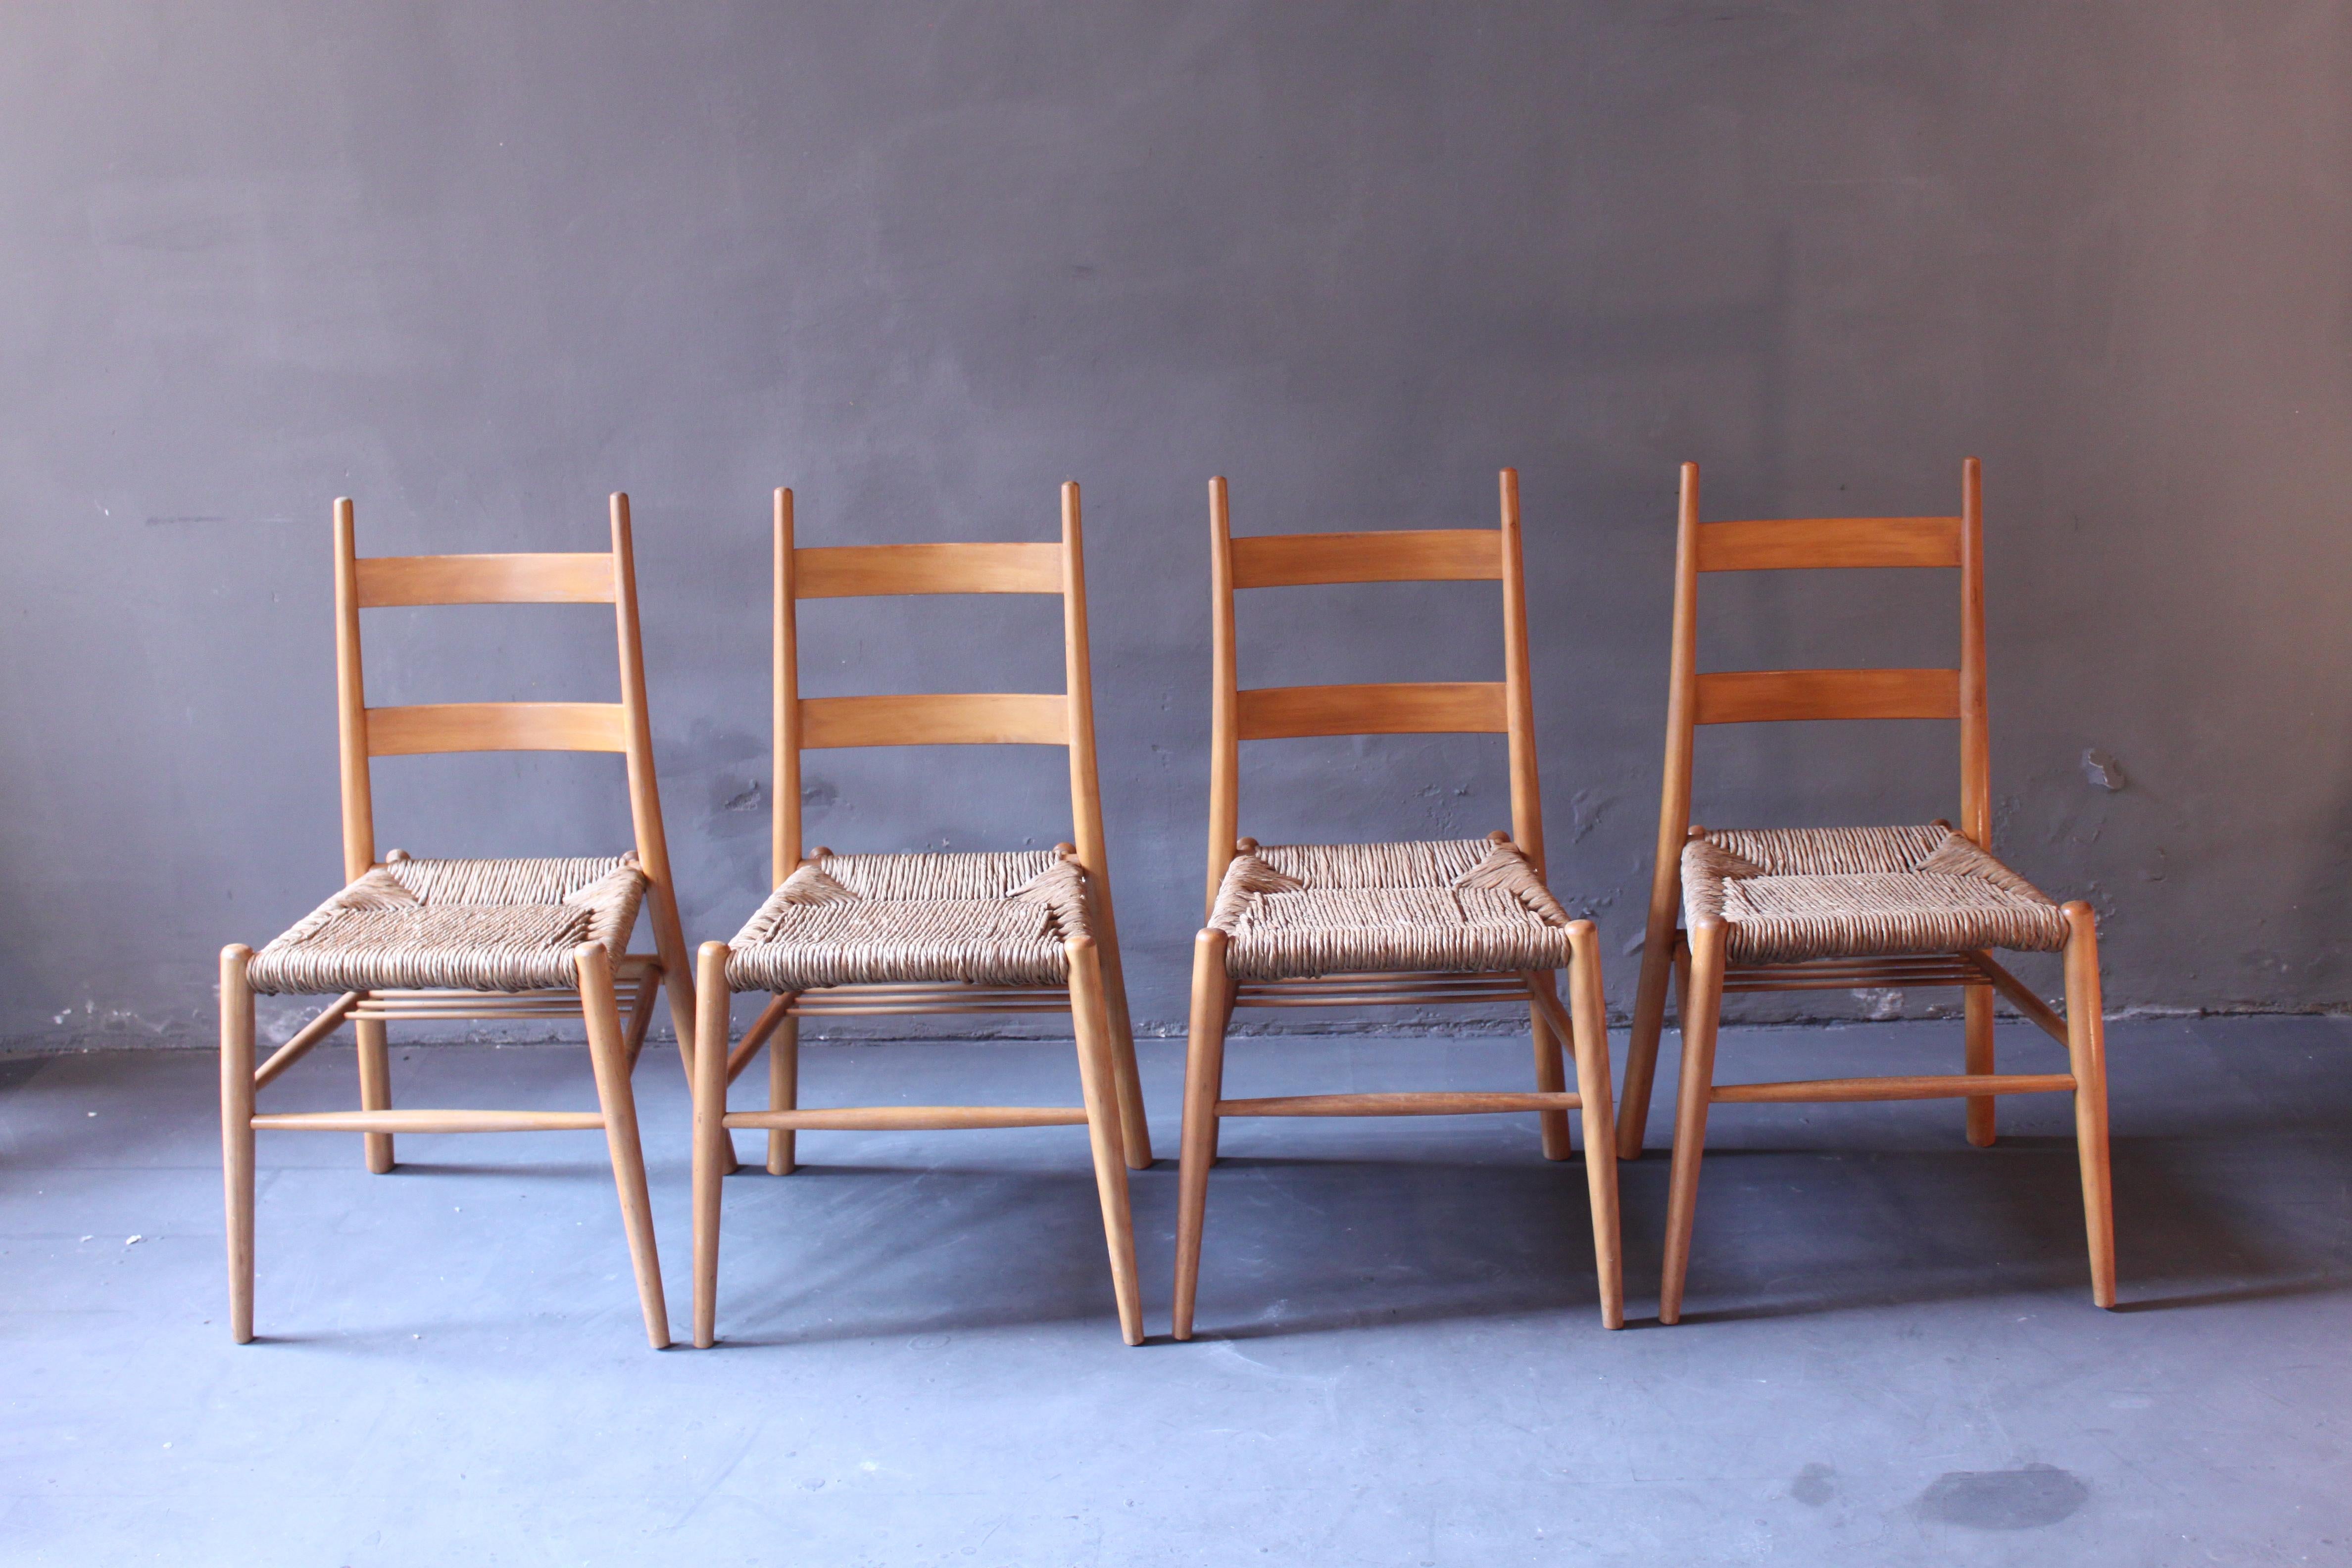 Mid-Century Modern 4 German Wicker Chairs from a Protestant Church in Bavaria, ca. 1956, brown For Sale